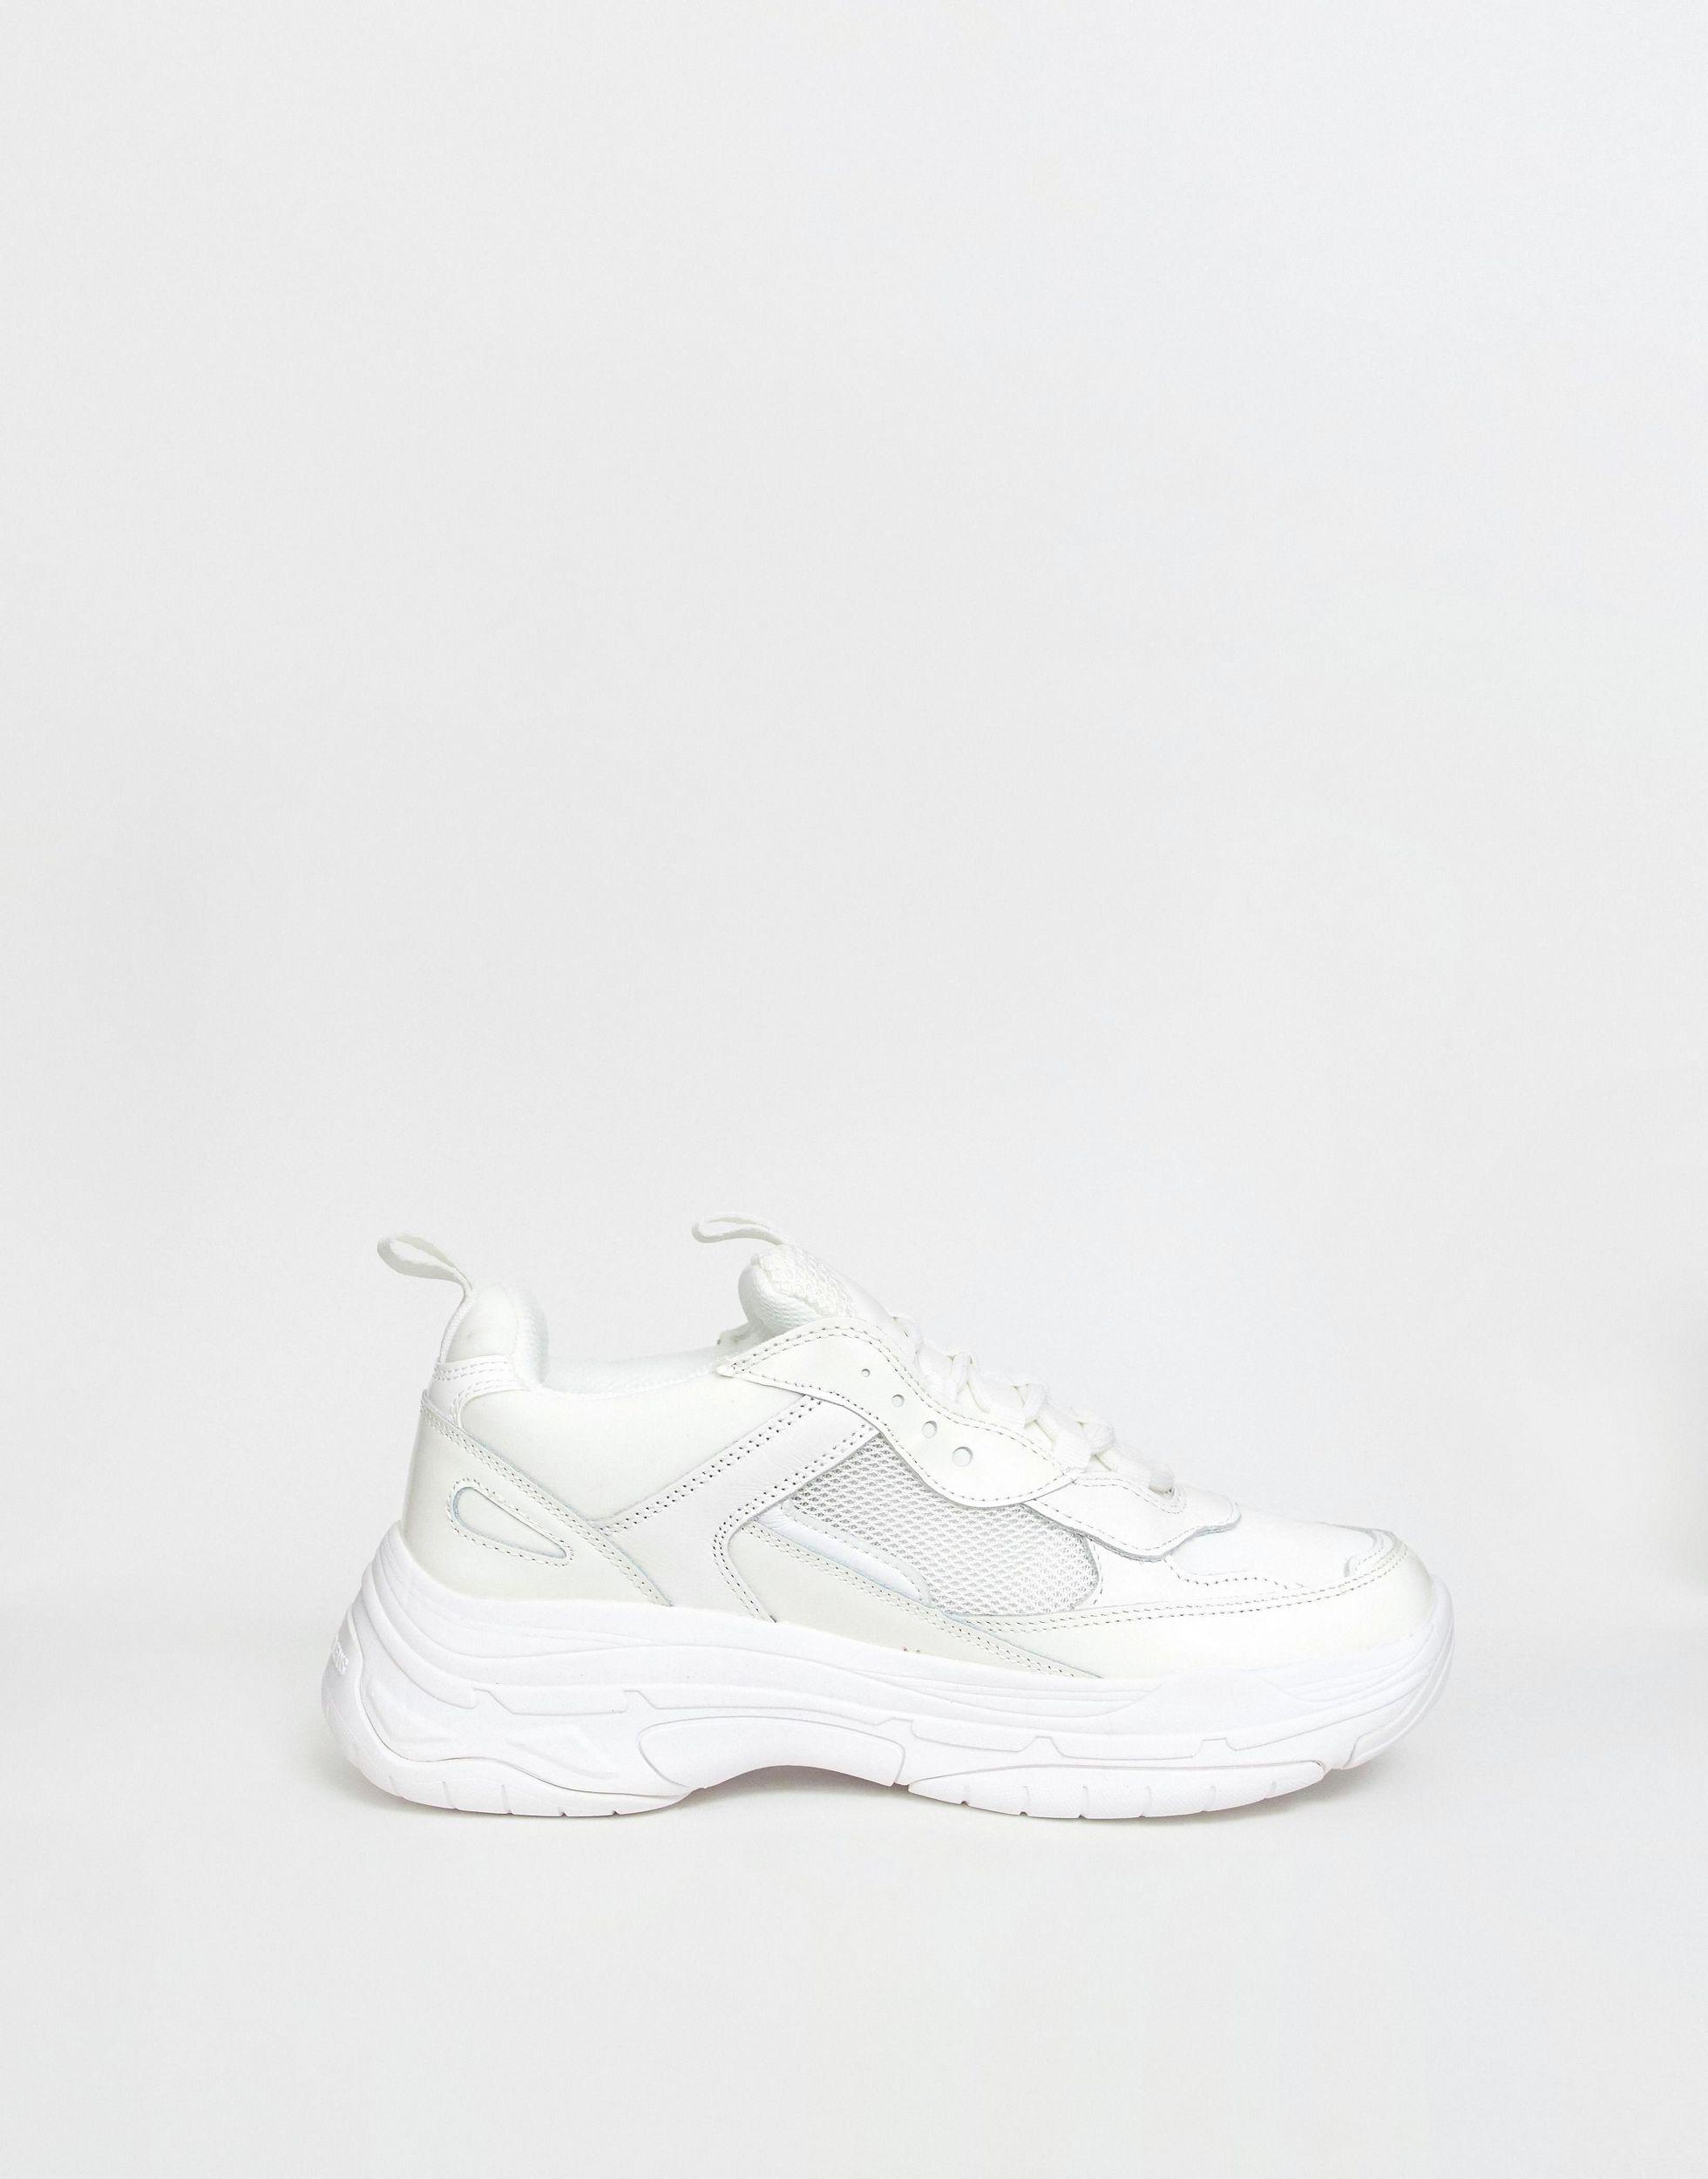 Calvin Klein Marvin Chunky Trainers in White for Men | Lyst